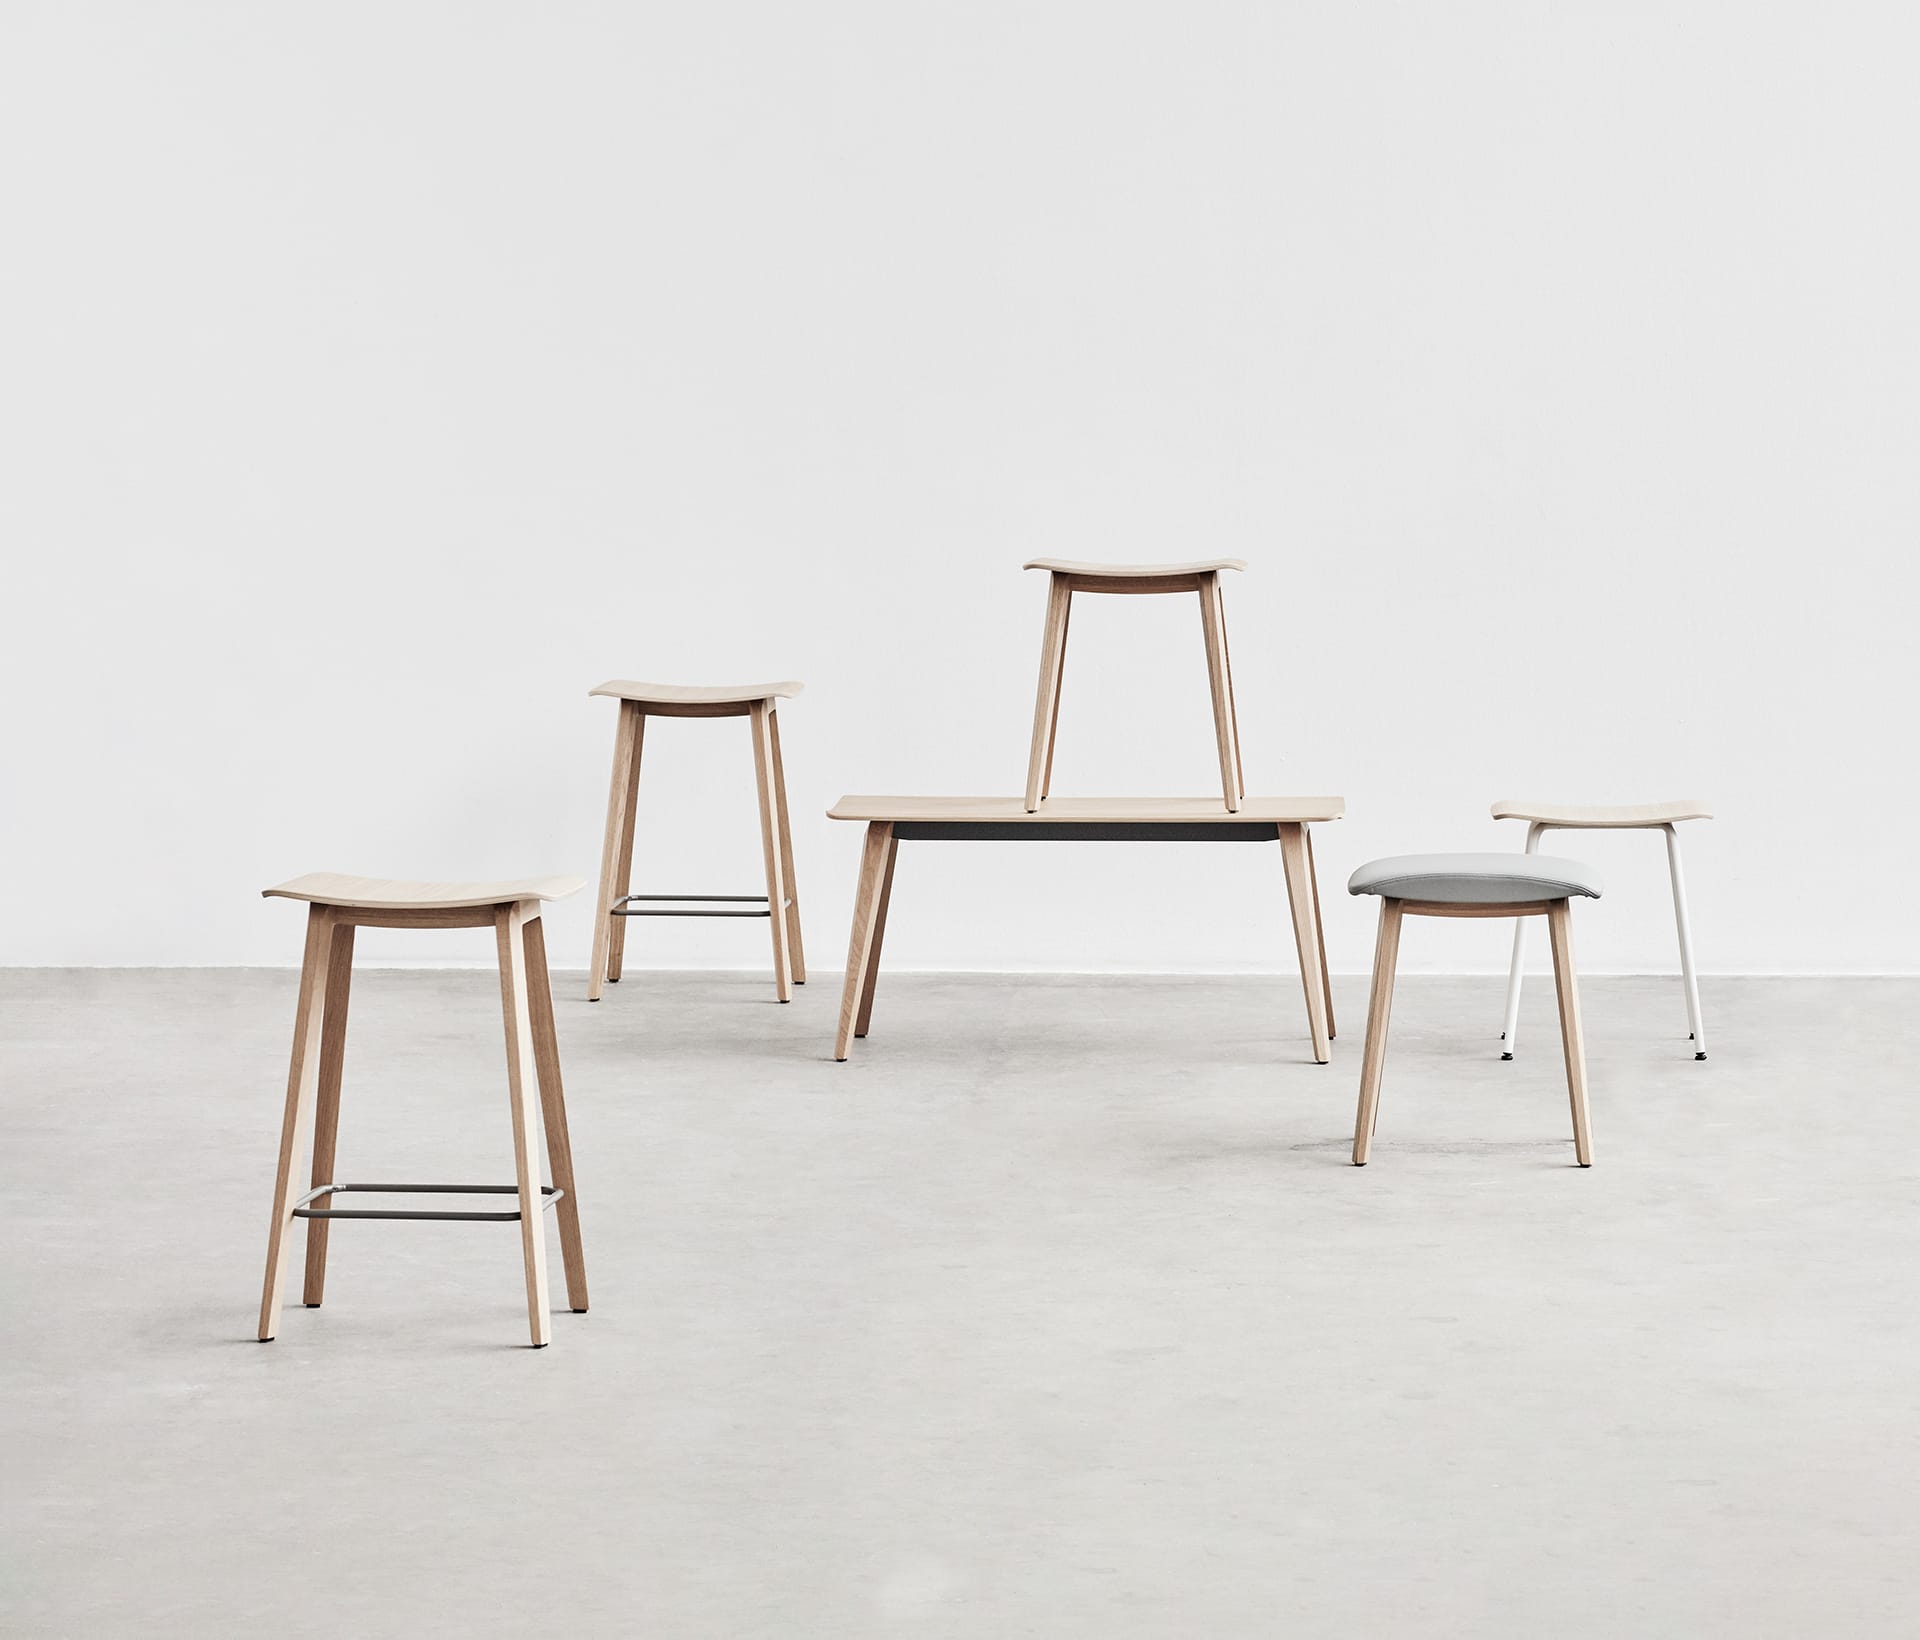 A collection of office stools in a white room.